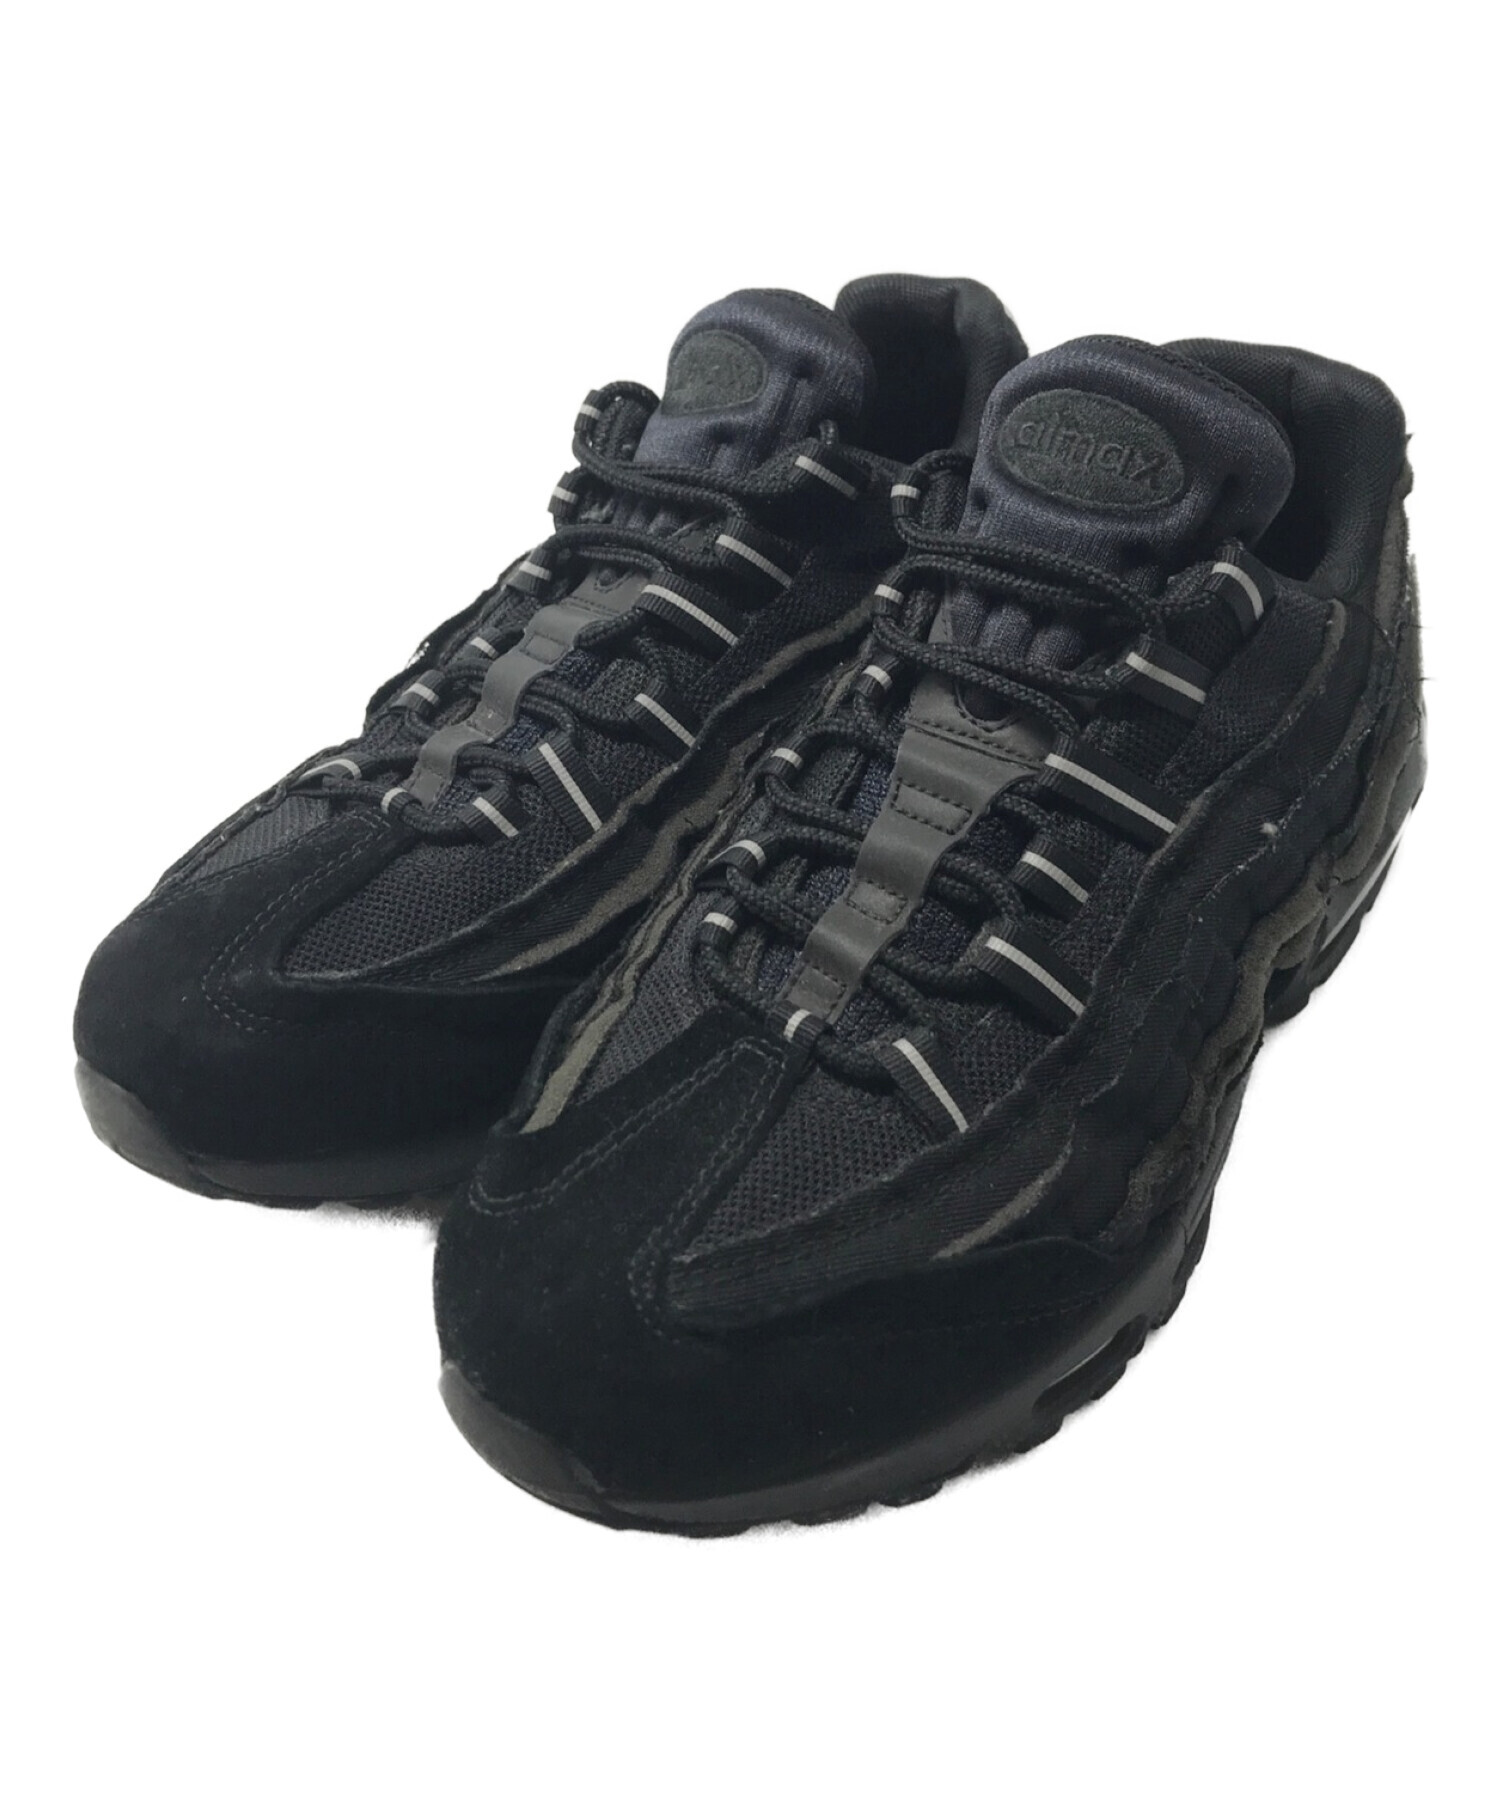 COMME des GARCONS NIKE AIR MAX 95 CDG 27